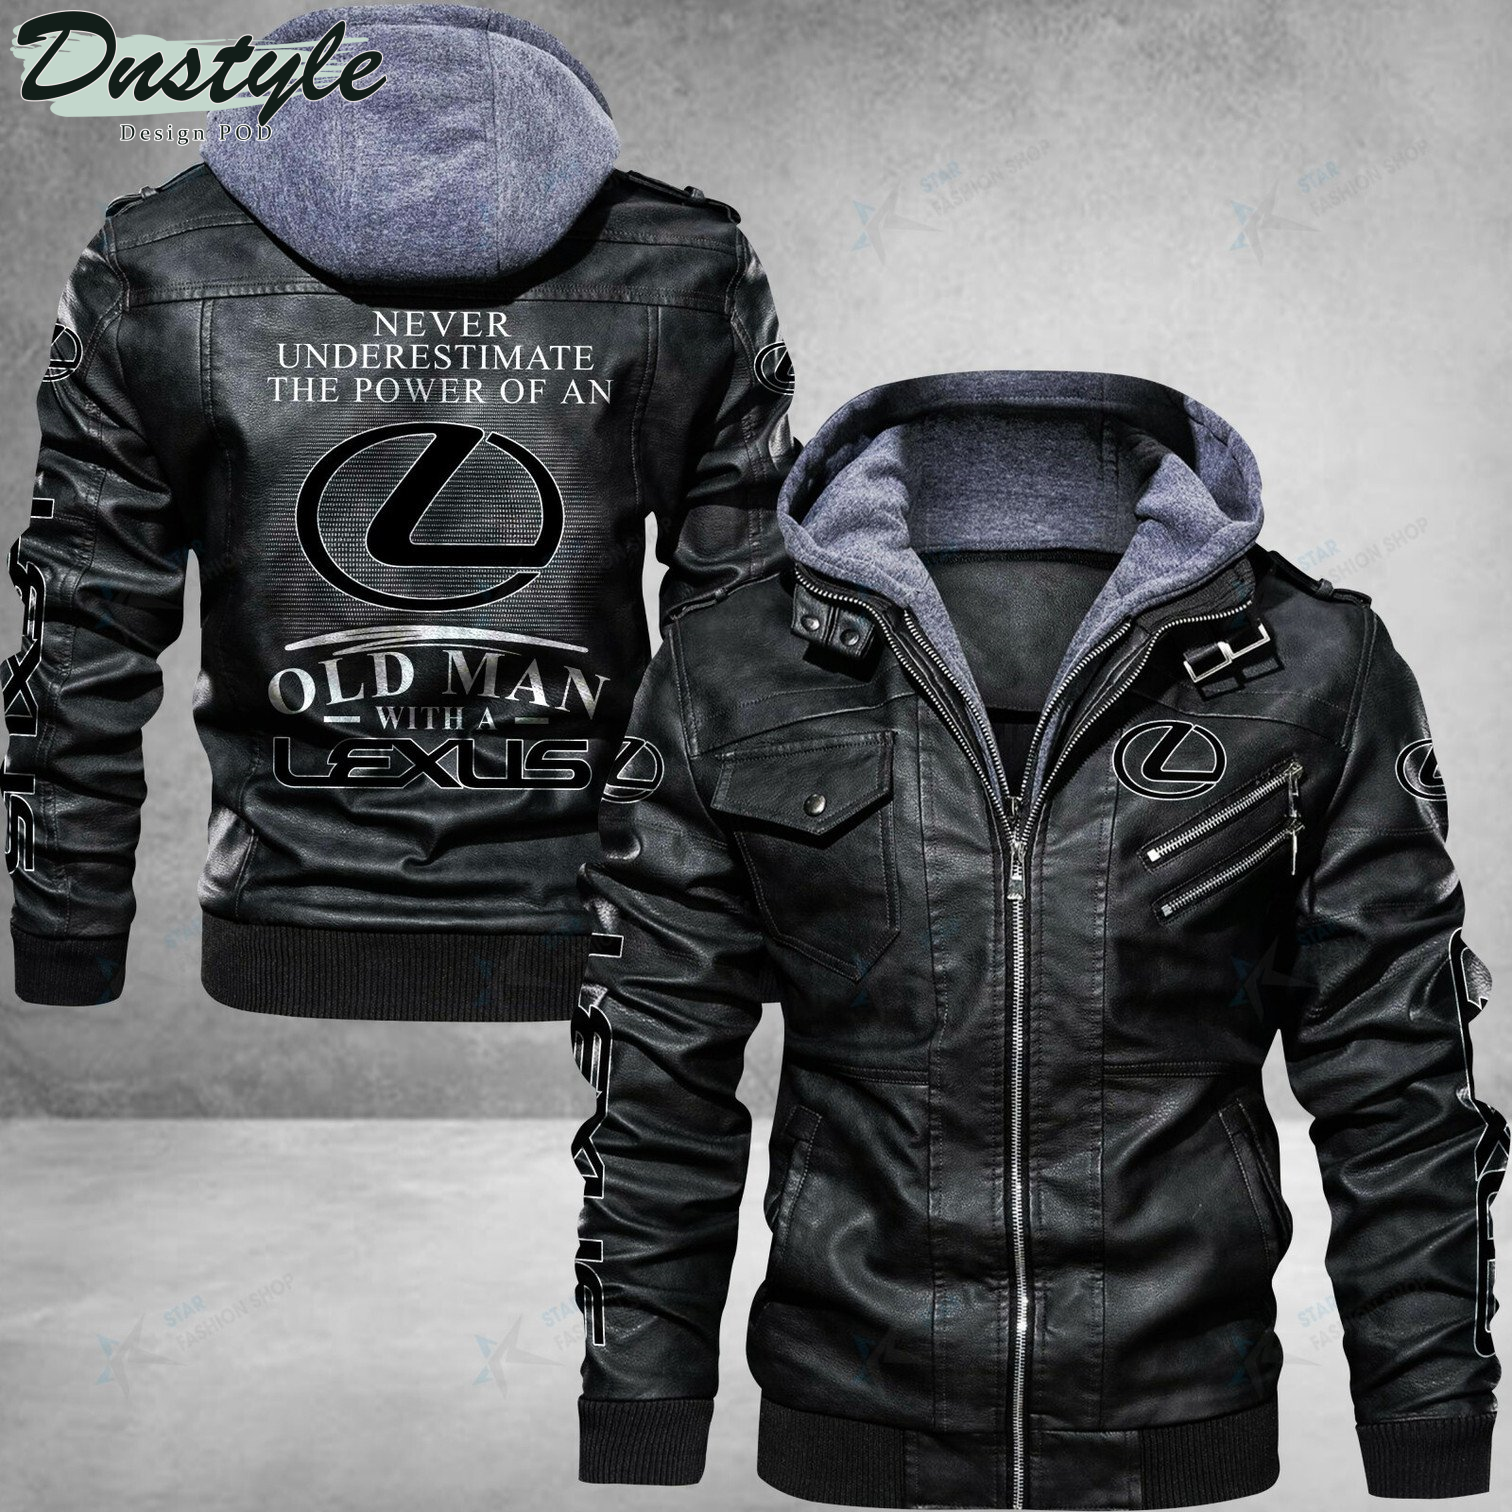 Lexus never underestimate the power of an old man leather jacket